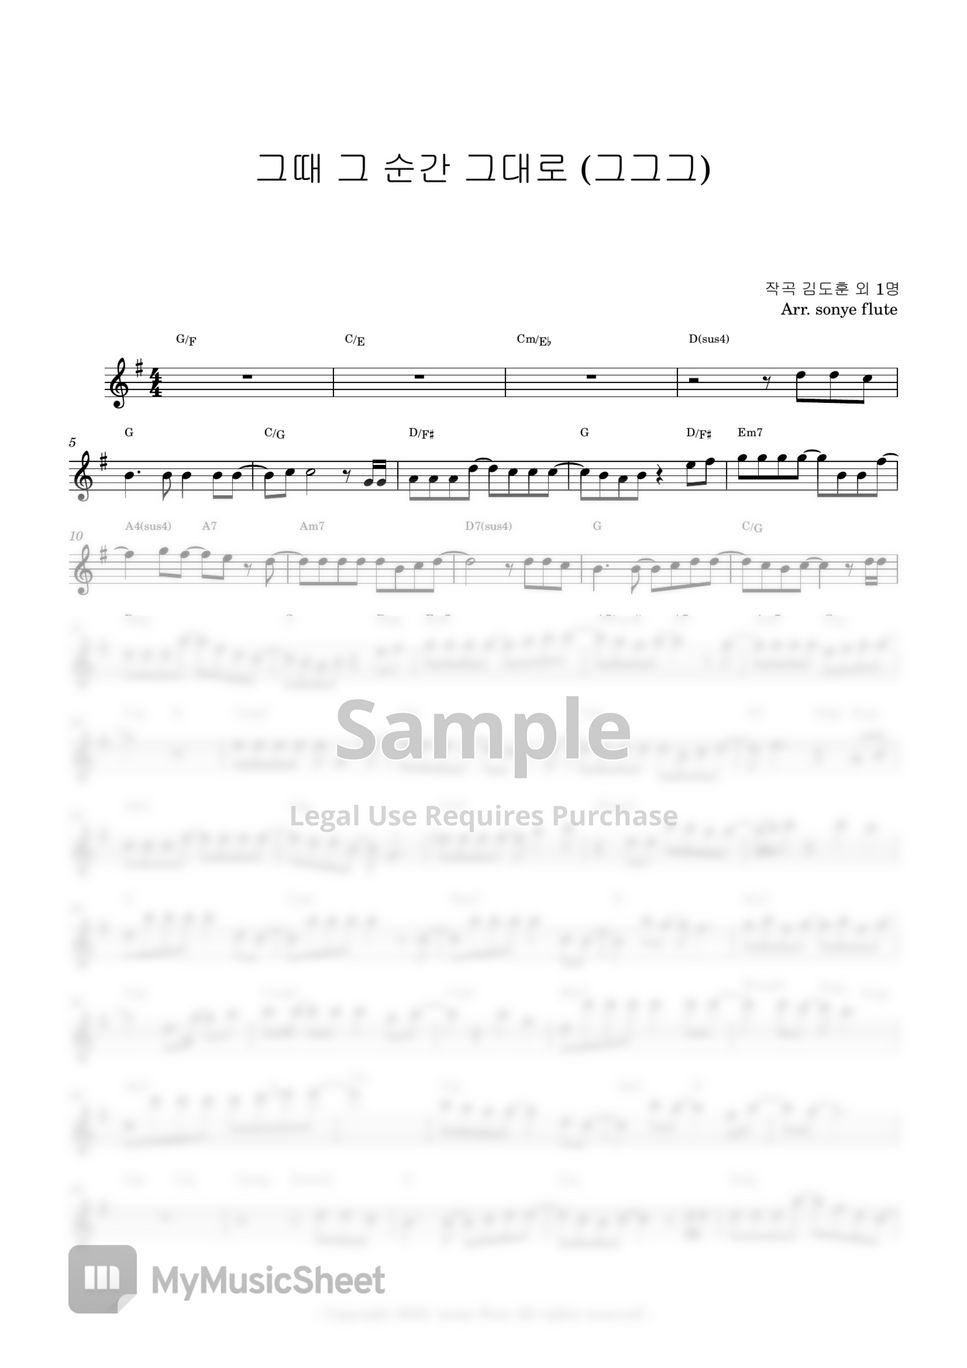 WSG WANNABE - At That Moment 그때 그 순간 그대로 (Flute Sheet Music) by sonye flute